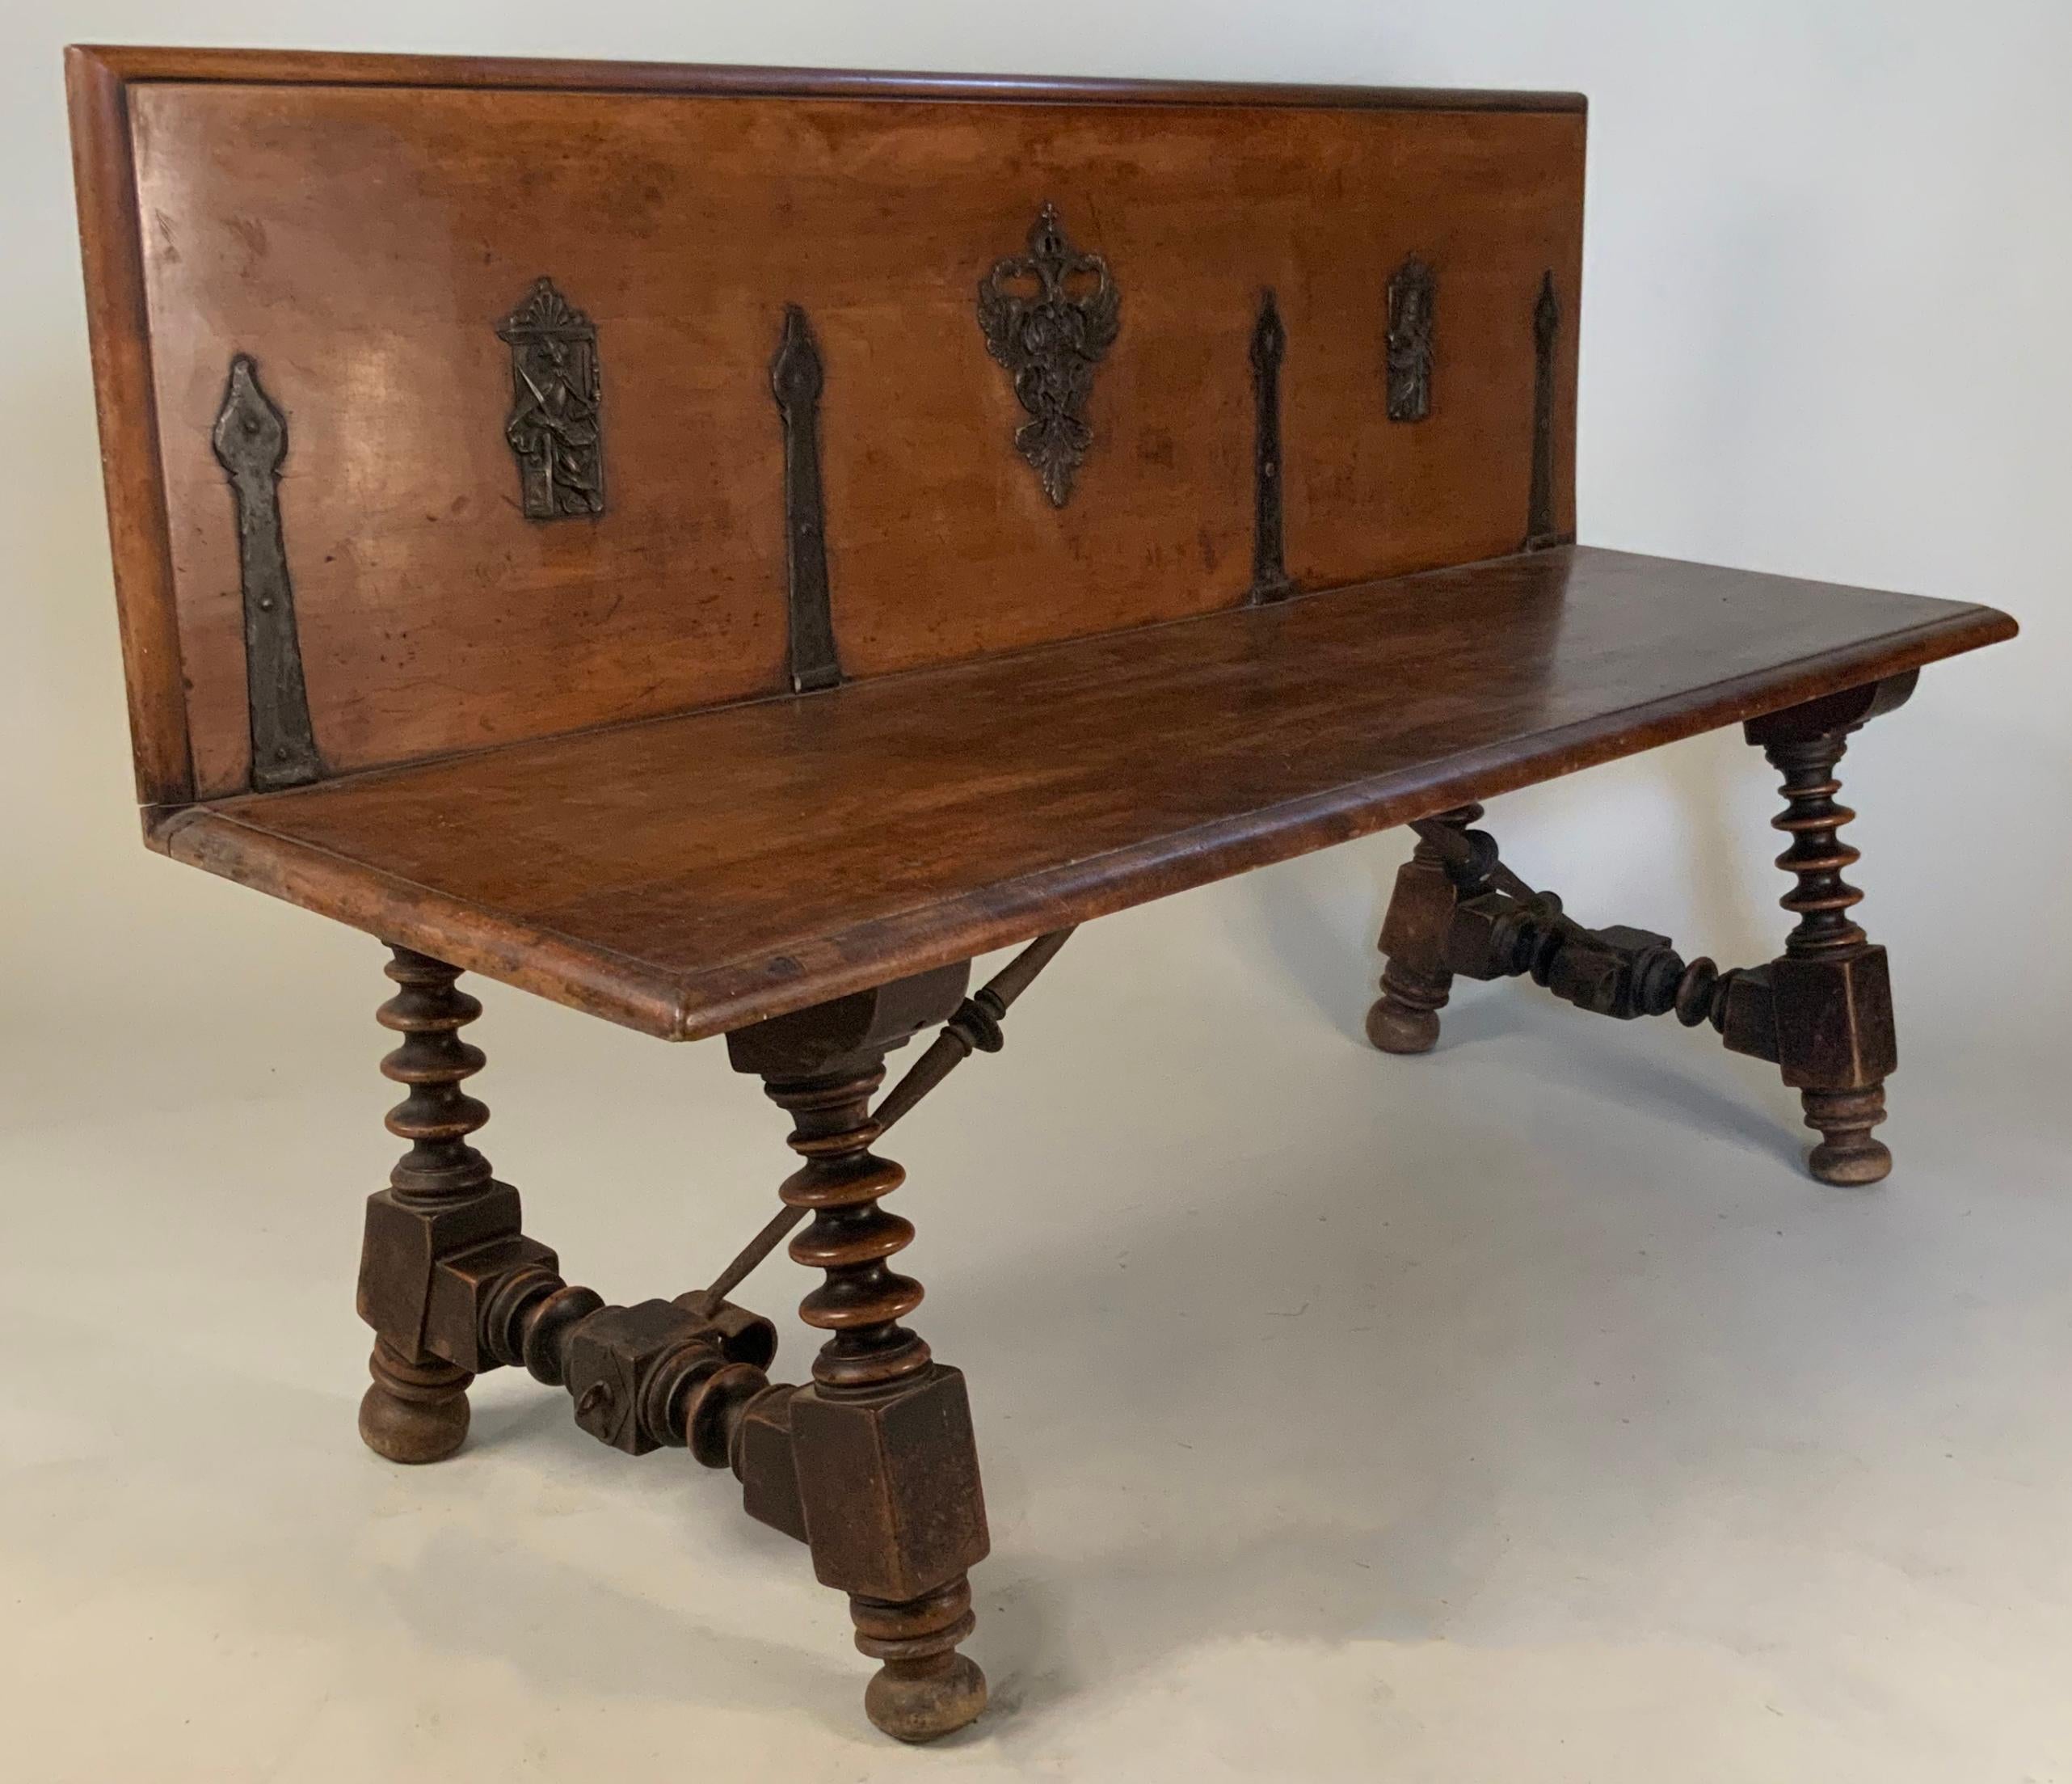 A very unique antique late 19th century Italian walnut bench, with a back likely made from a repurposed trunk lid. The base of elaborately turned spindle legs, connected with iron fittings and stretchers. The back retains the original iron hinge